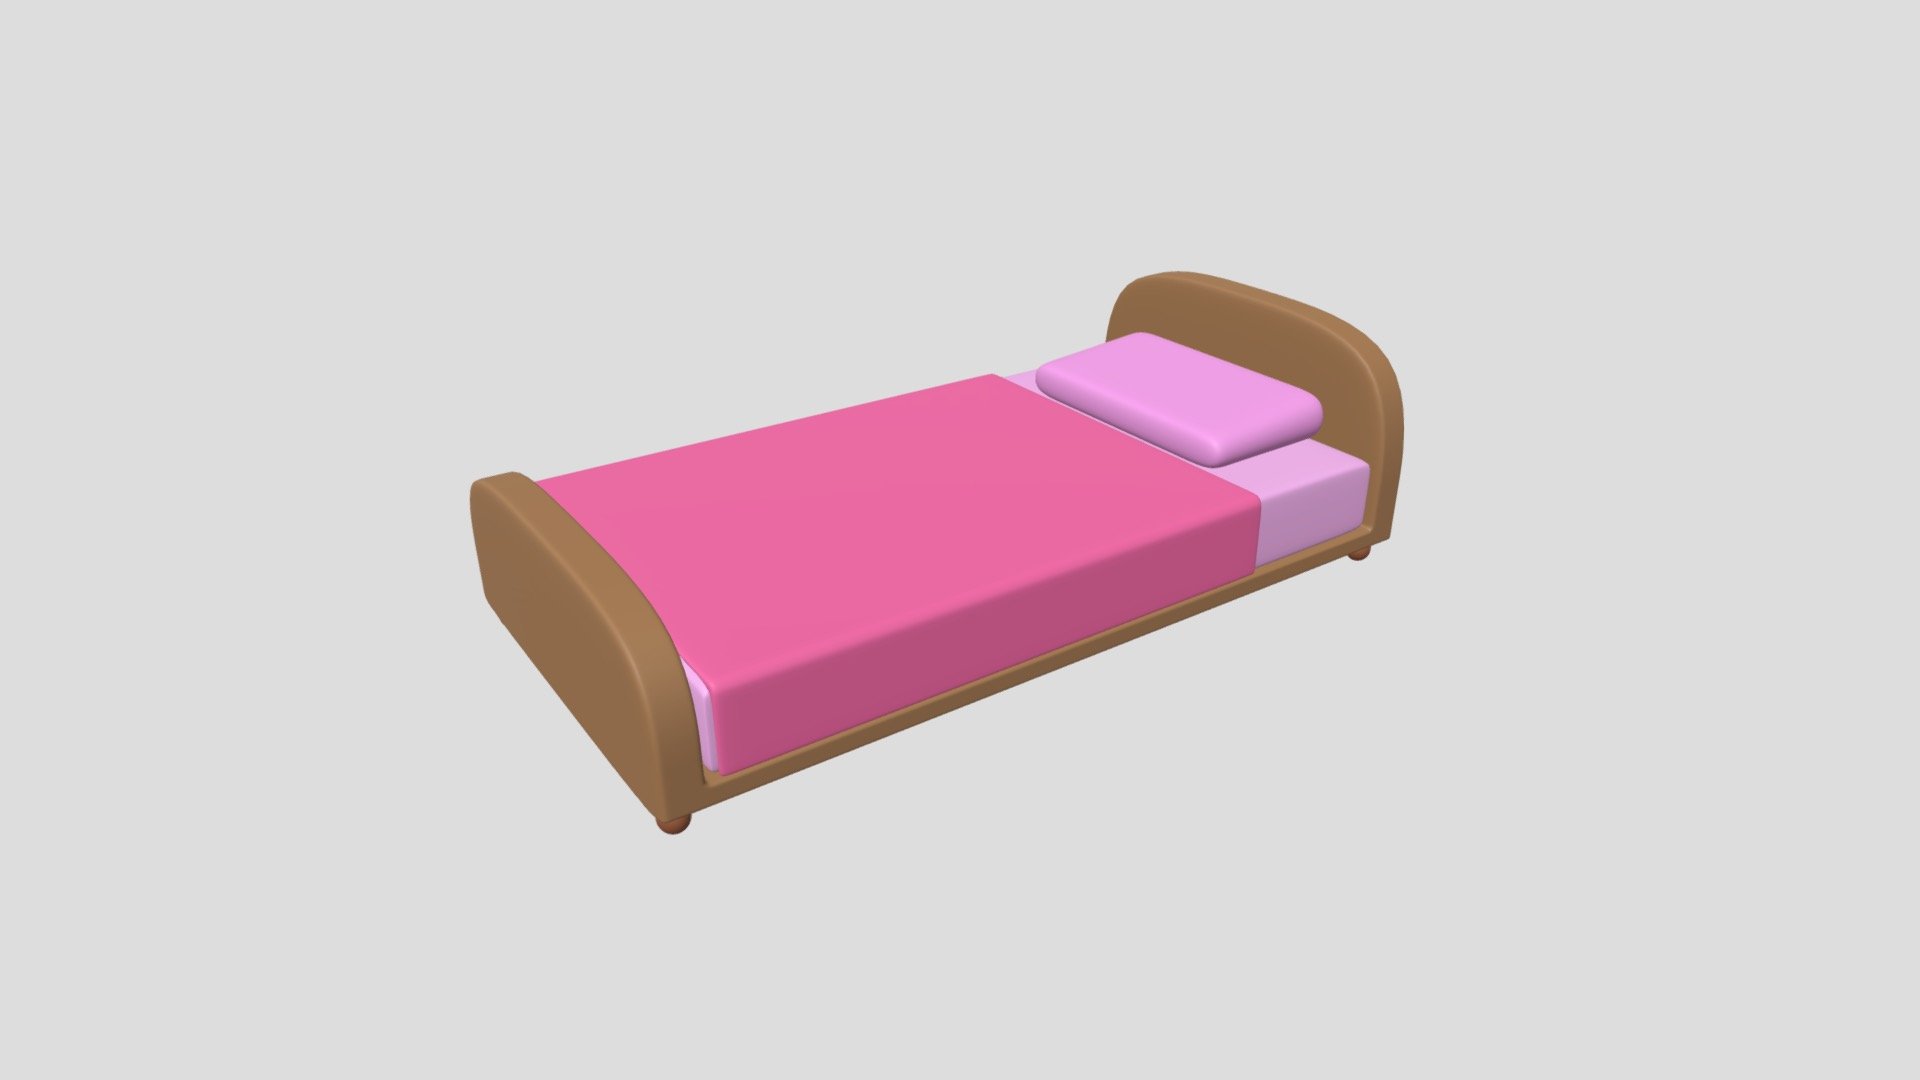 Subdivision Level: 3

Mirrored 1 - Bed.

Formats: .stl .obj .fbx .dae

Origin located on middle-bottom 

Polygons: 76800

Vertices: 38416

I hope you enjoy the model! - Cartoon Bed - Buy Royalty Free 3D model by Ed+ (@EDplus) 3d model